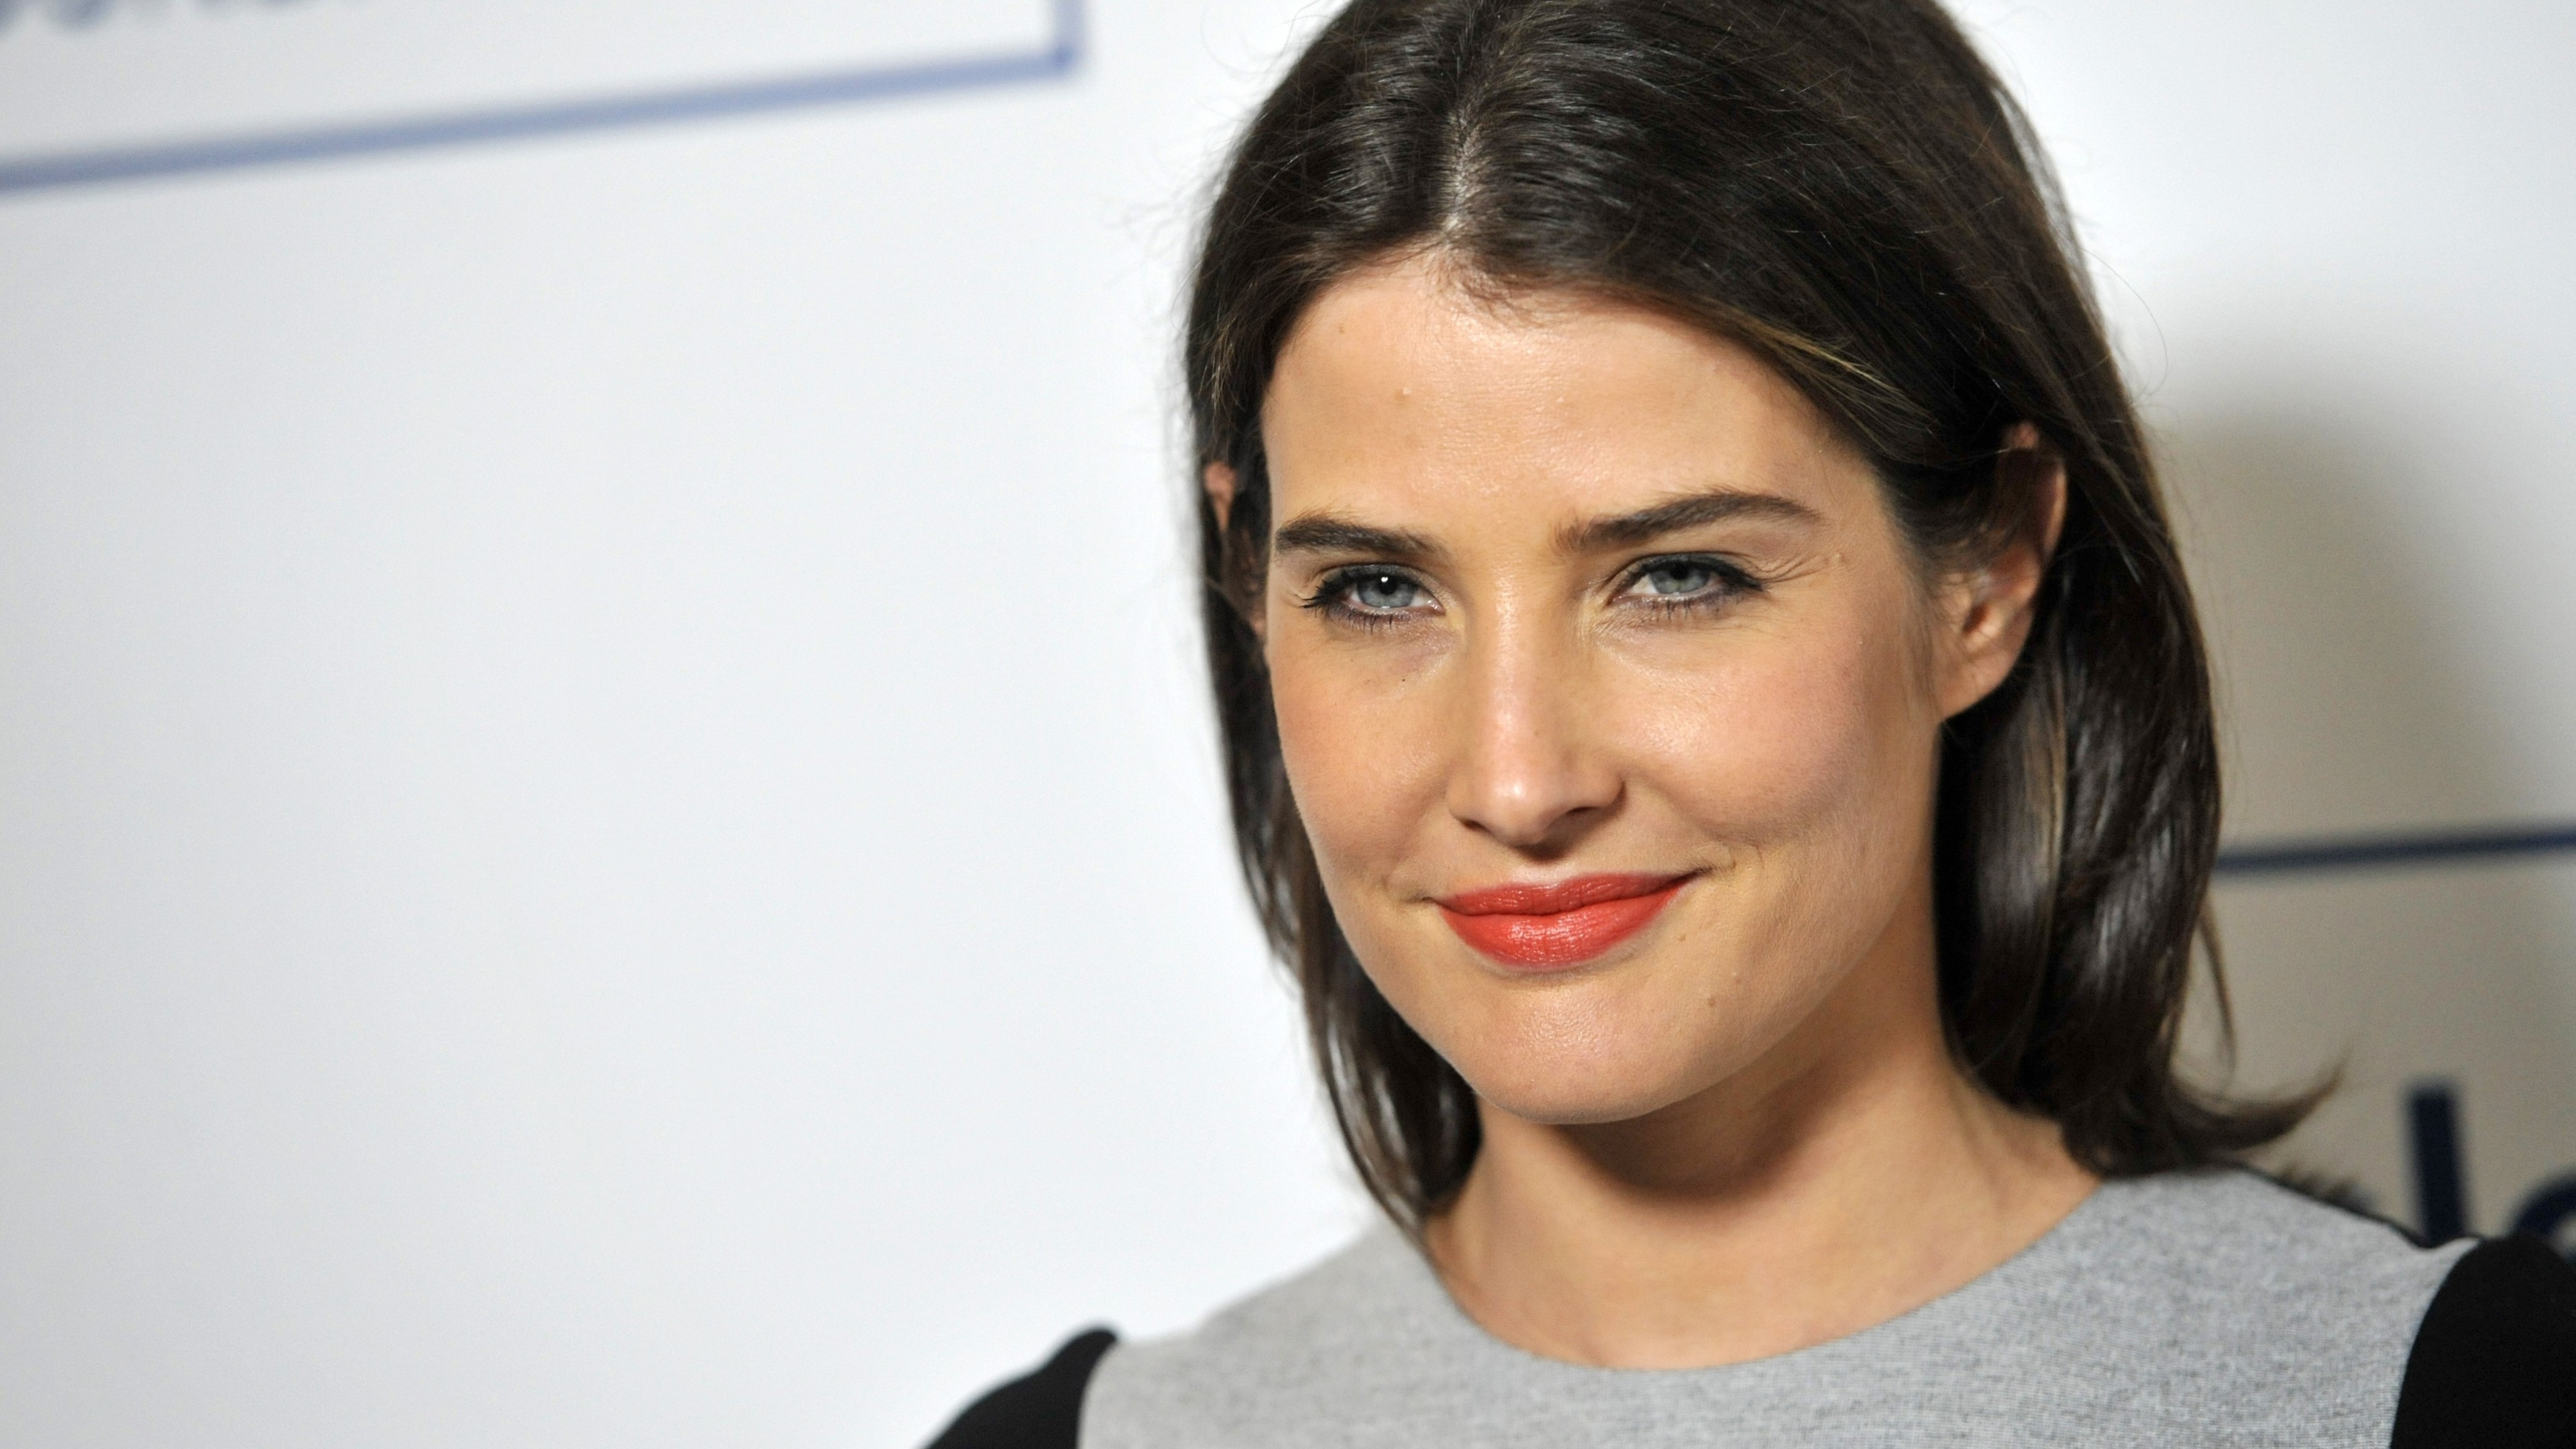 Cobie Smulders for 3840 x 2160 Ultra HD resolution